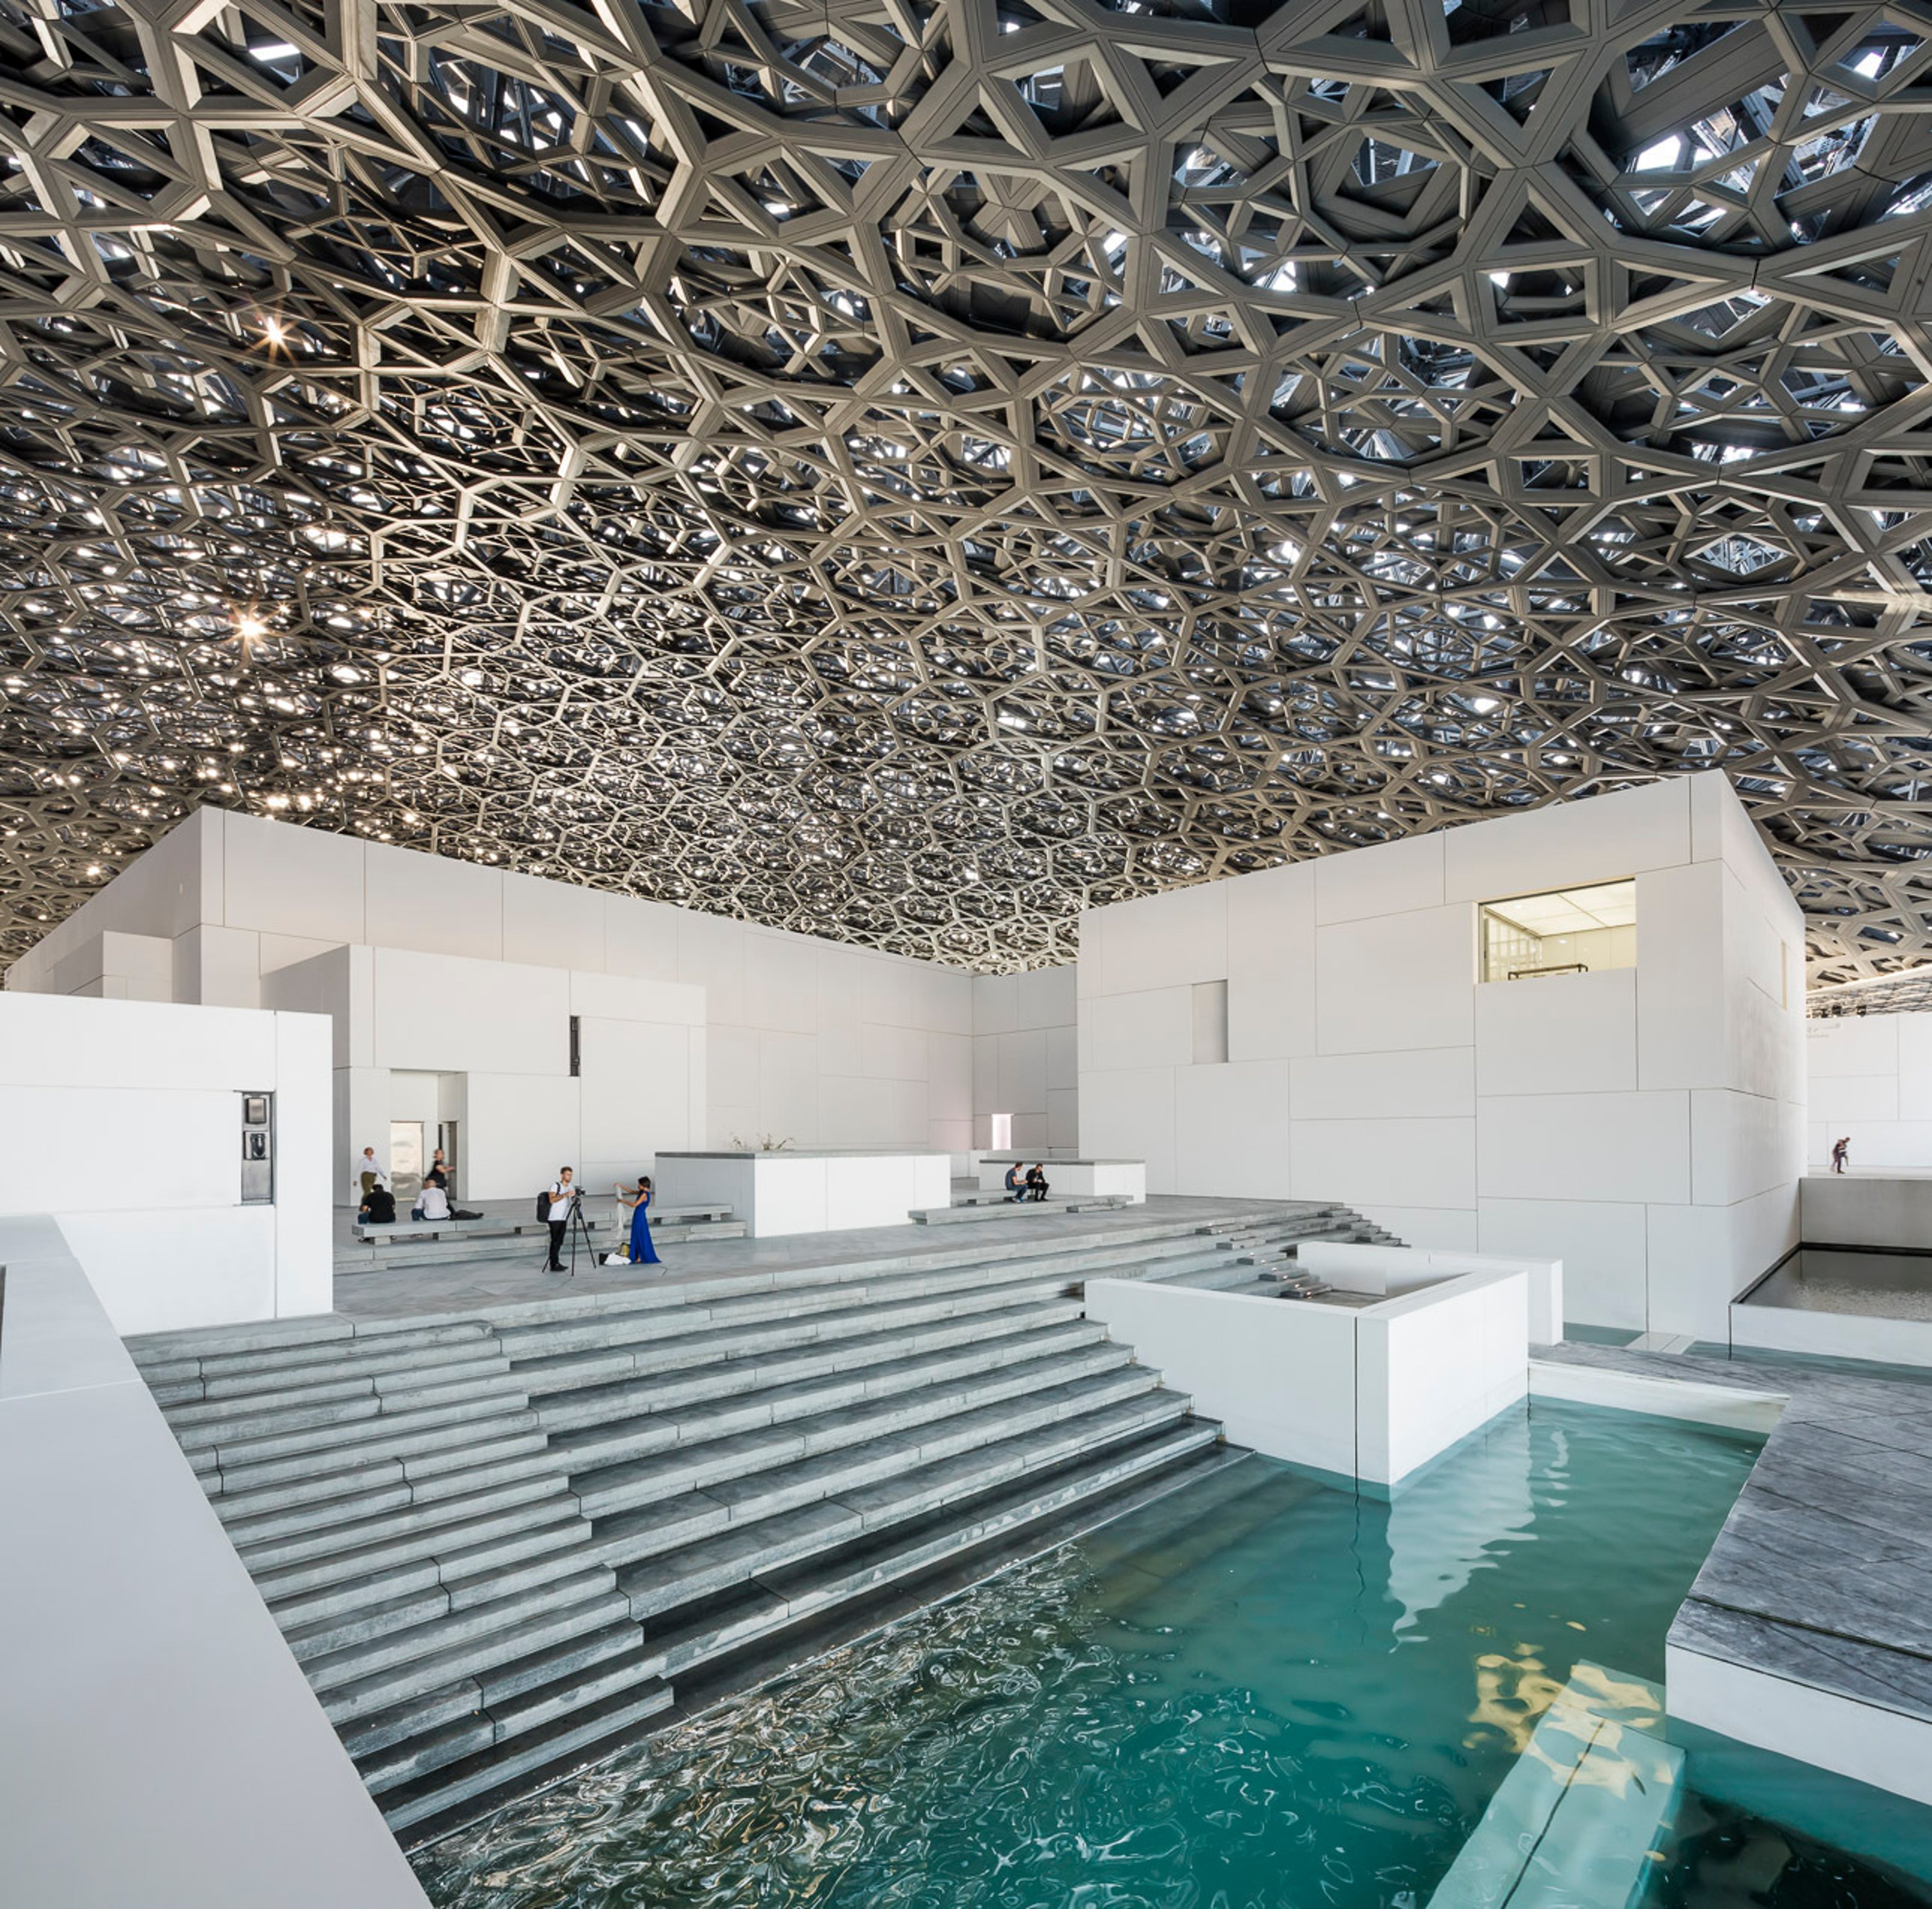 Interior view of Louvre Abu Dhabi with high and wide stairways, white geometric decorations on the ceiling and a pond inside.